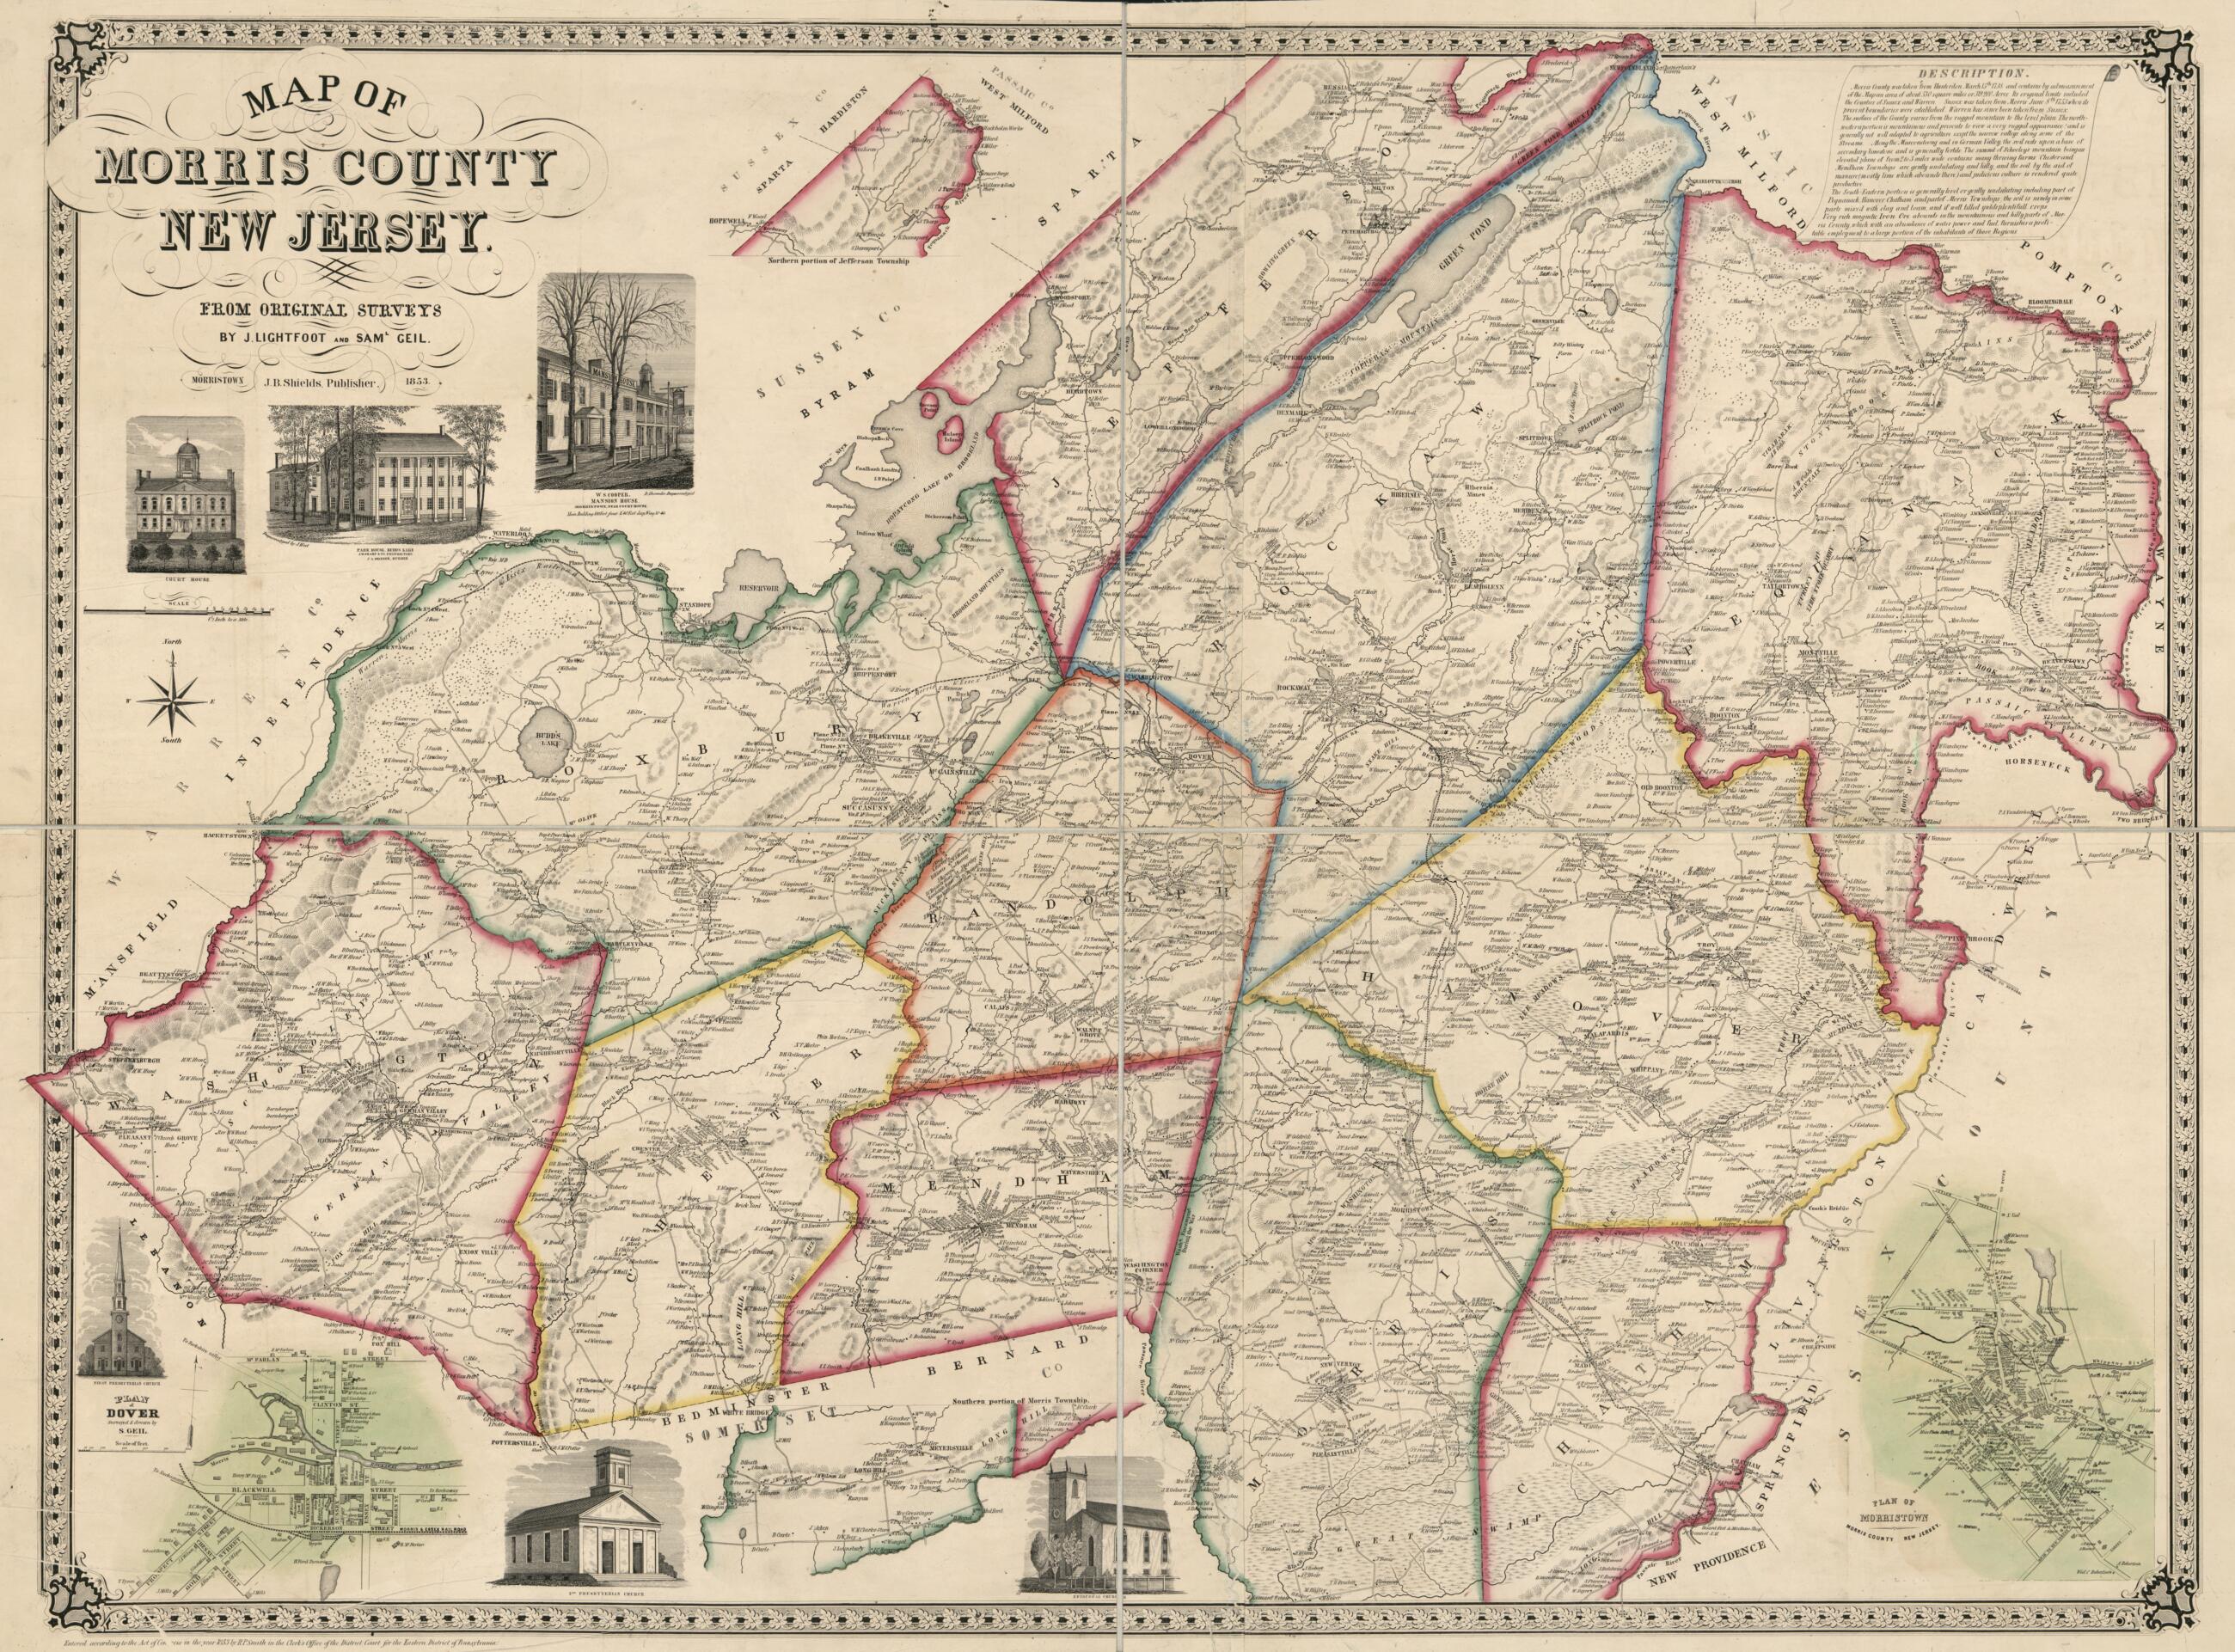 This old map of Map of Morris County, New Jersey : from Original Surveys from 1853 was created by Samuel Geil, Jesse Lightfoot, Robert Pearsall Smith in 1853